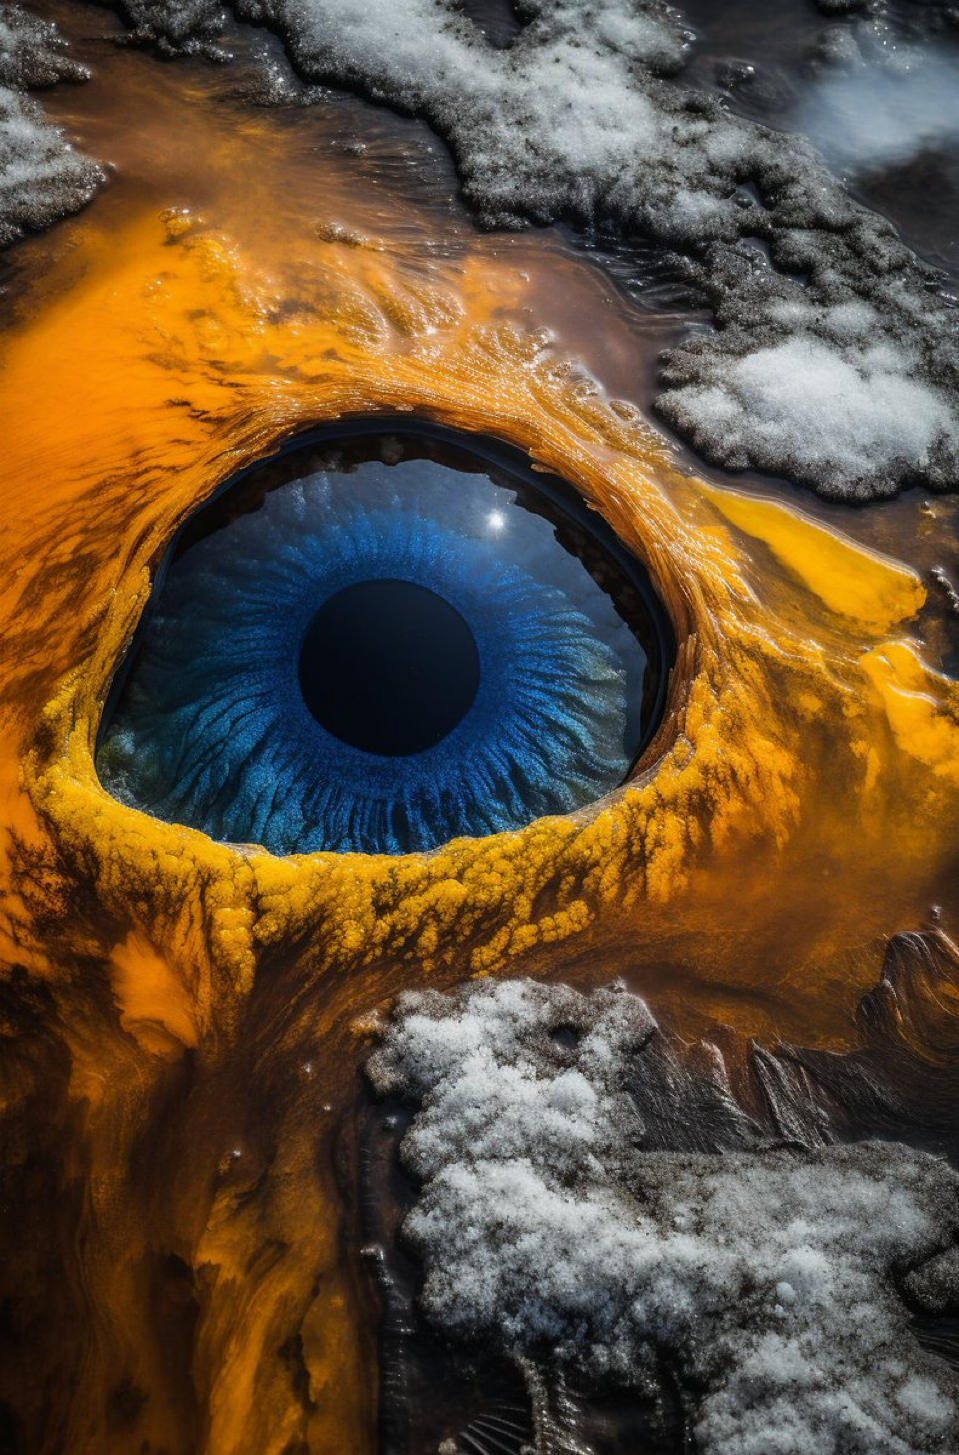 the ice formation at yellowstone park, in the style of dark azure and amber, photorealistic eye, werner herzog, yellow and...